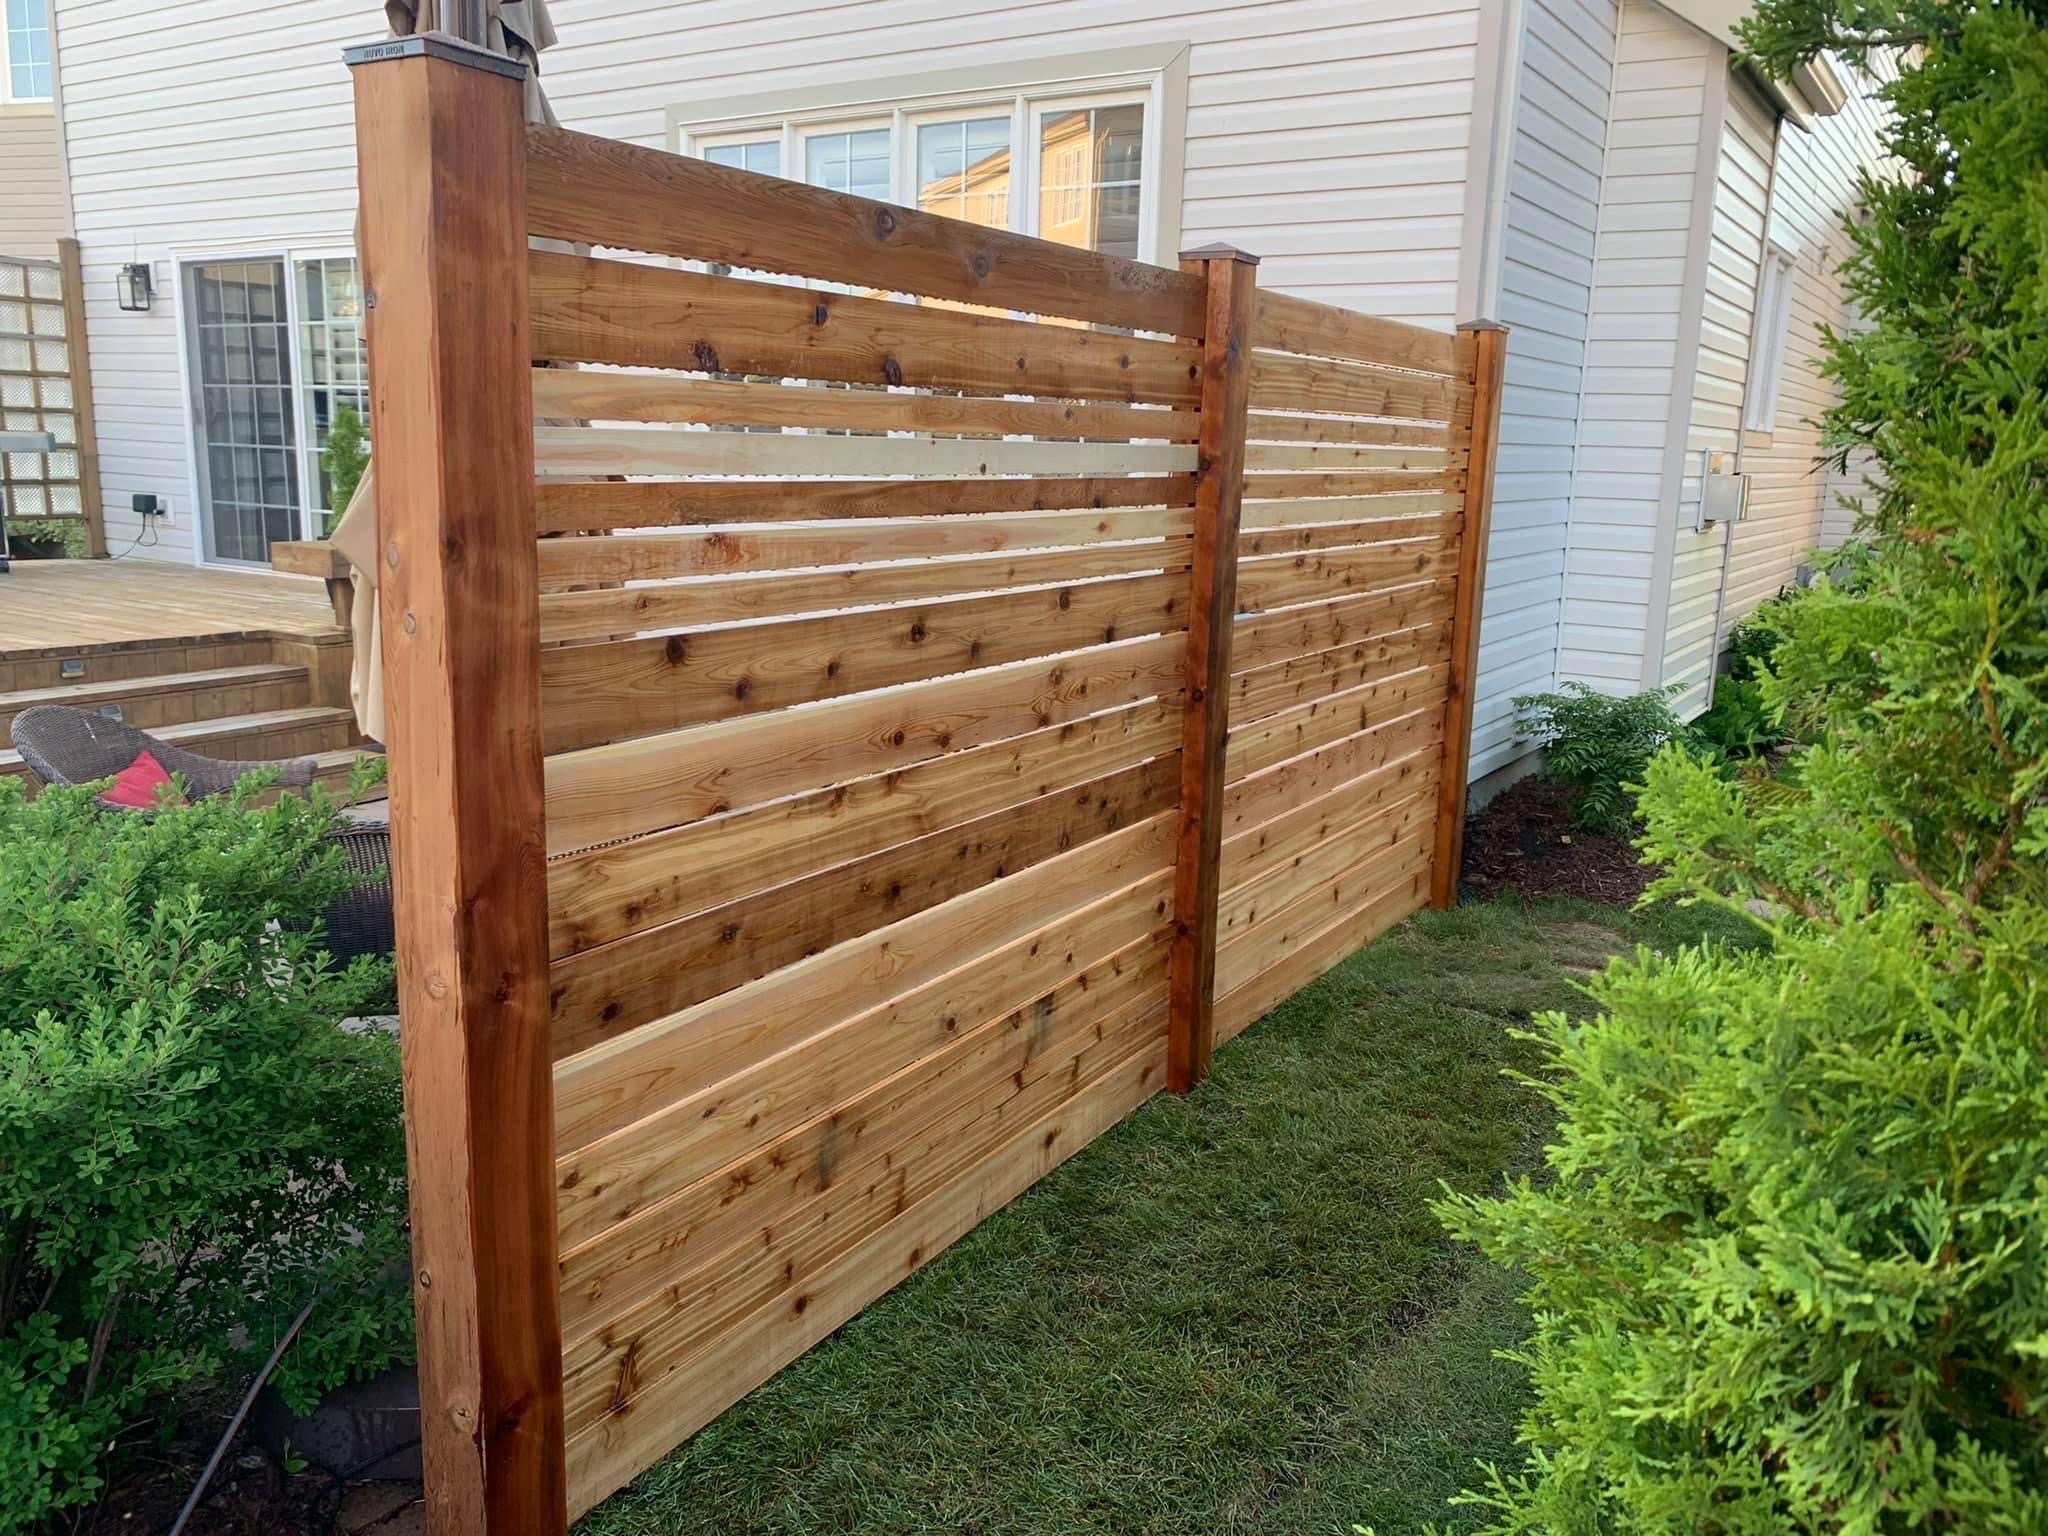 Wooden fence being installed in a back yard.